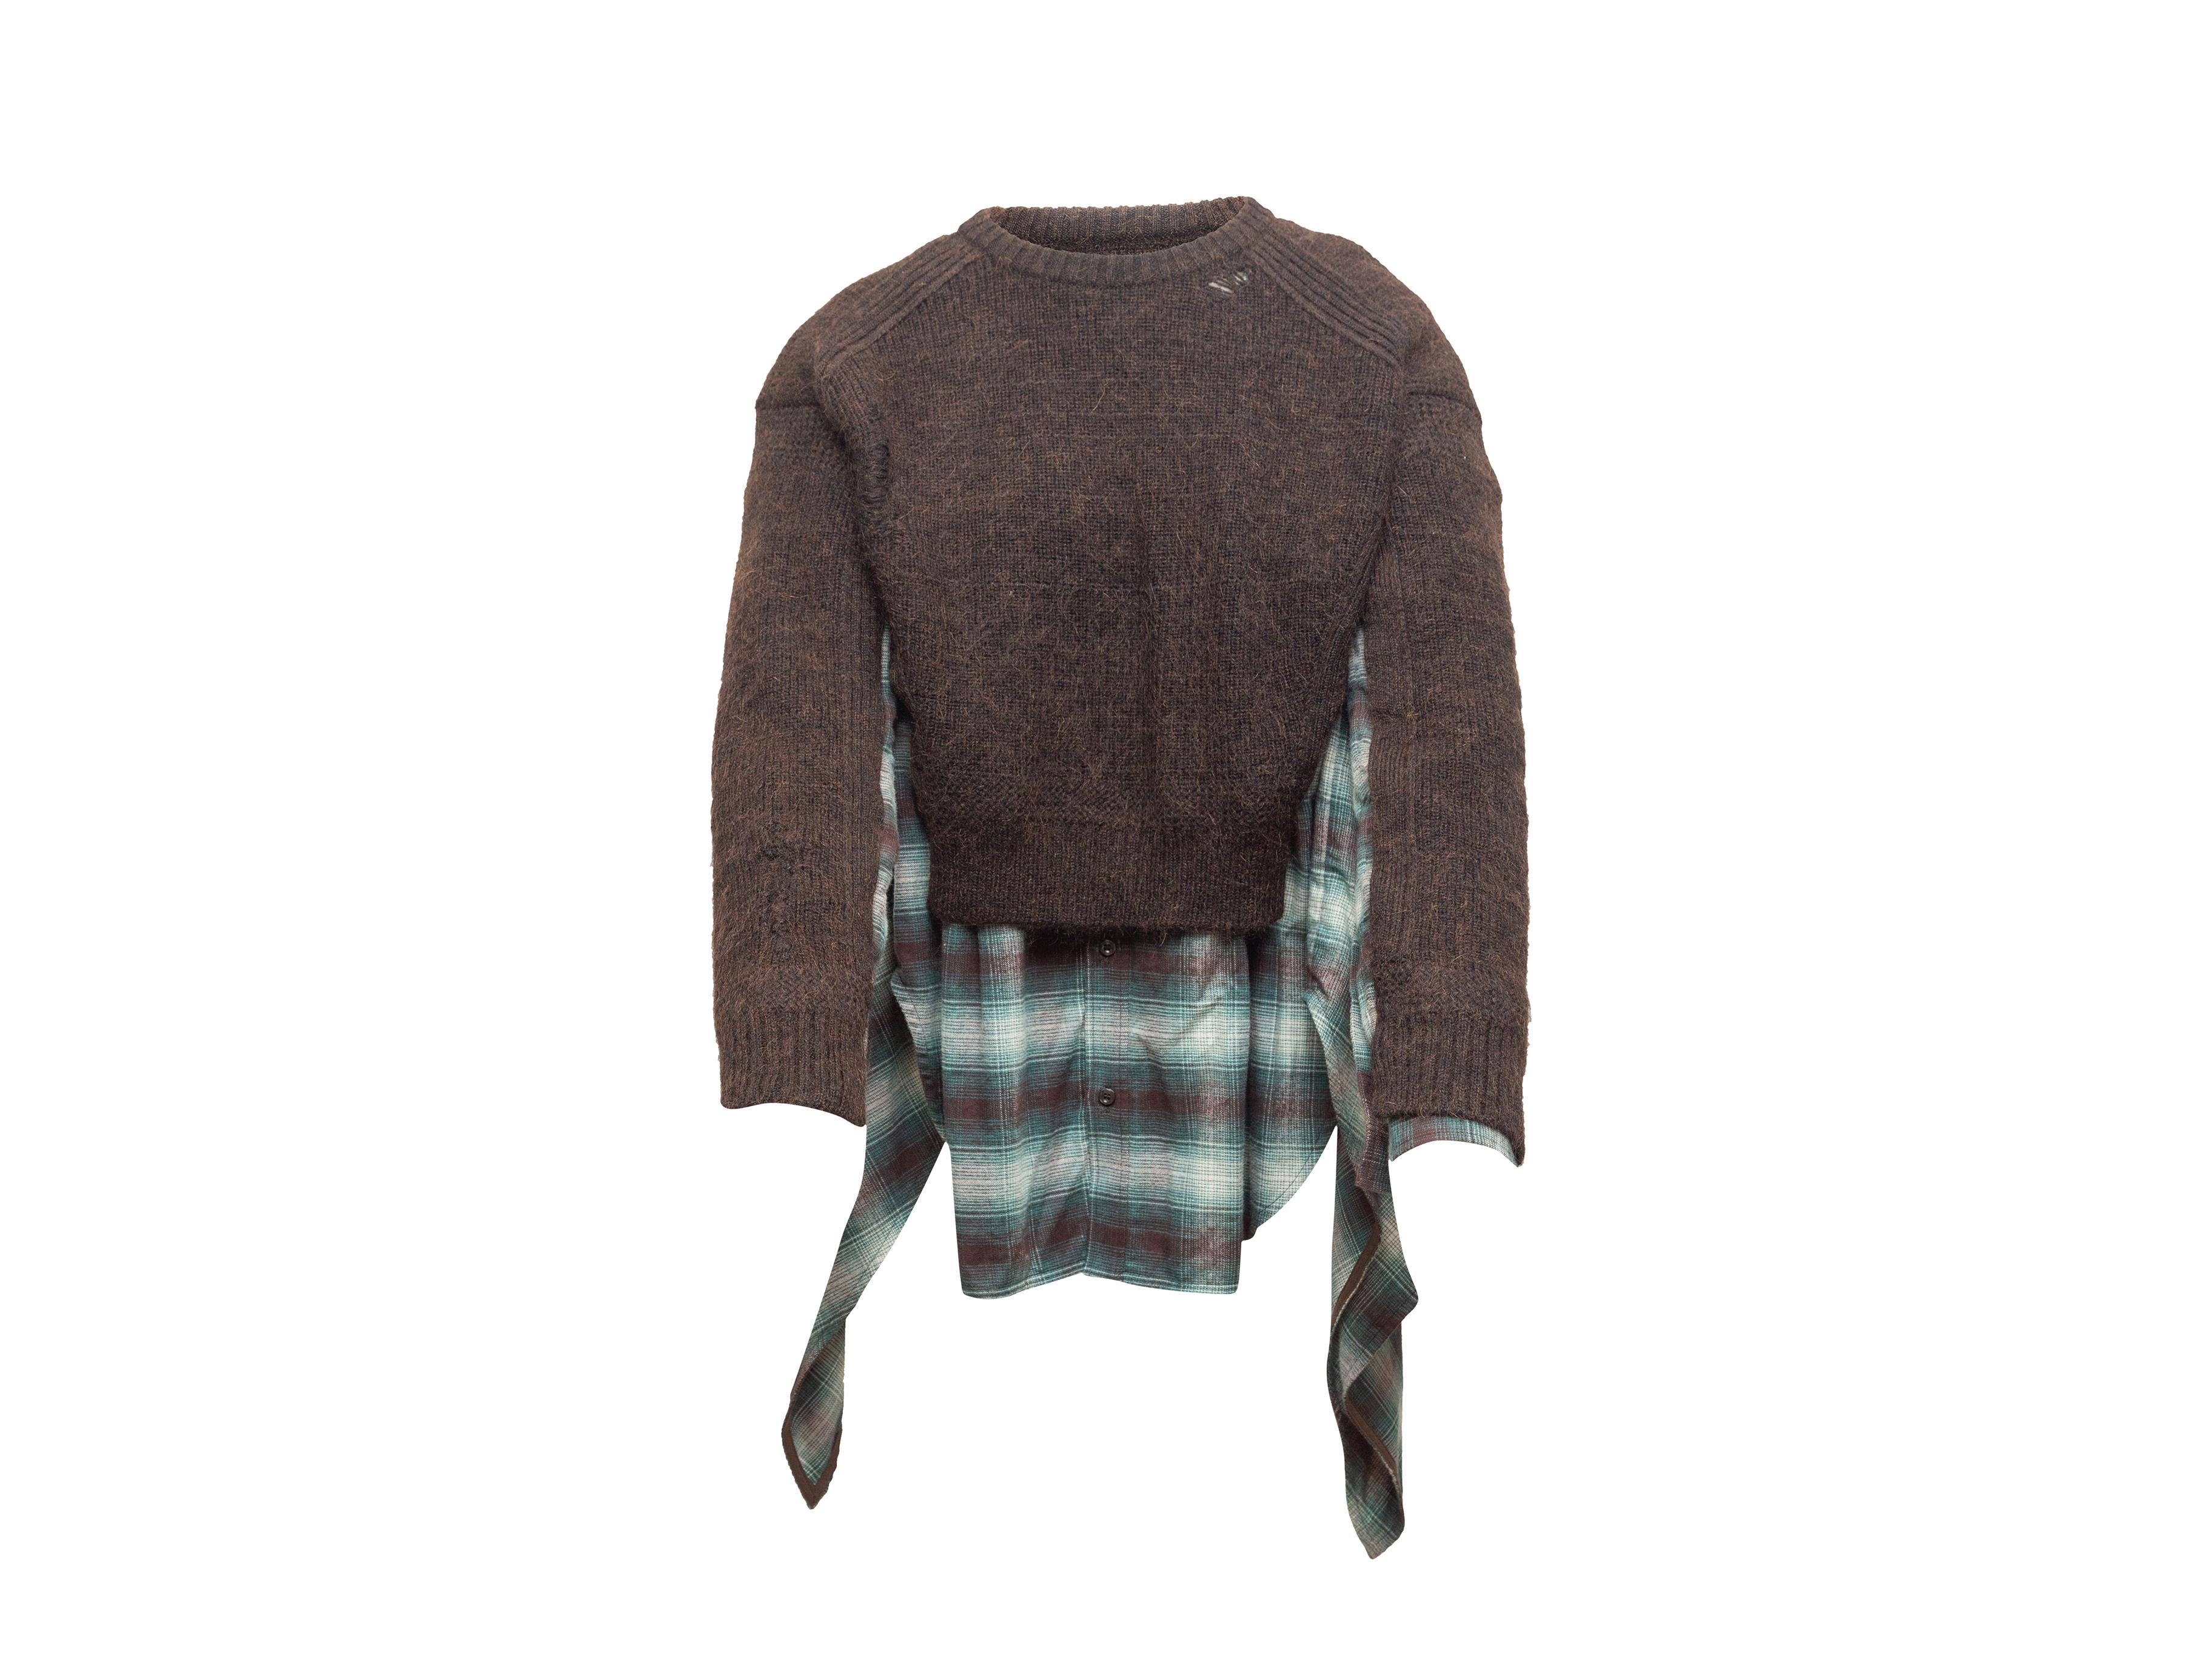 Product details: Brown, green, and white mohair-blend sweater by DSquared. Crew neckline. Plaid flannel underlay. 39